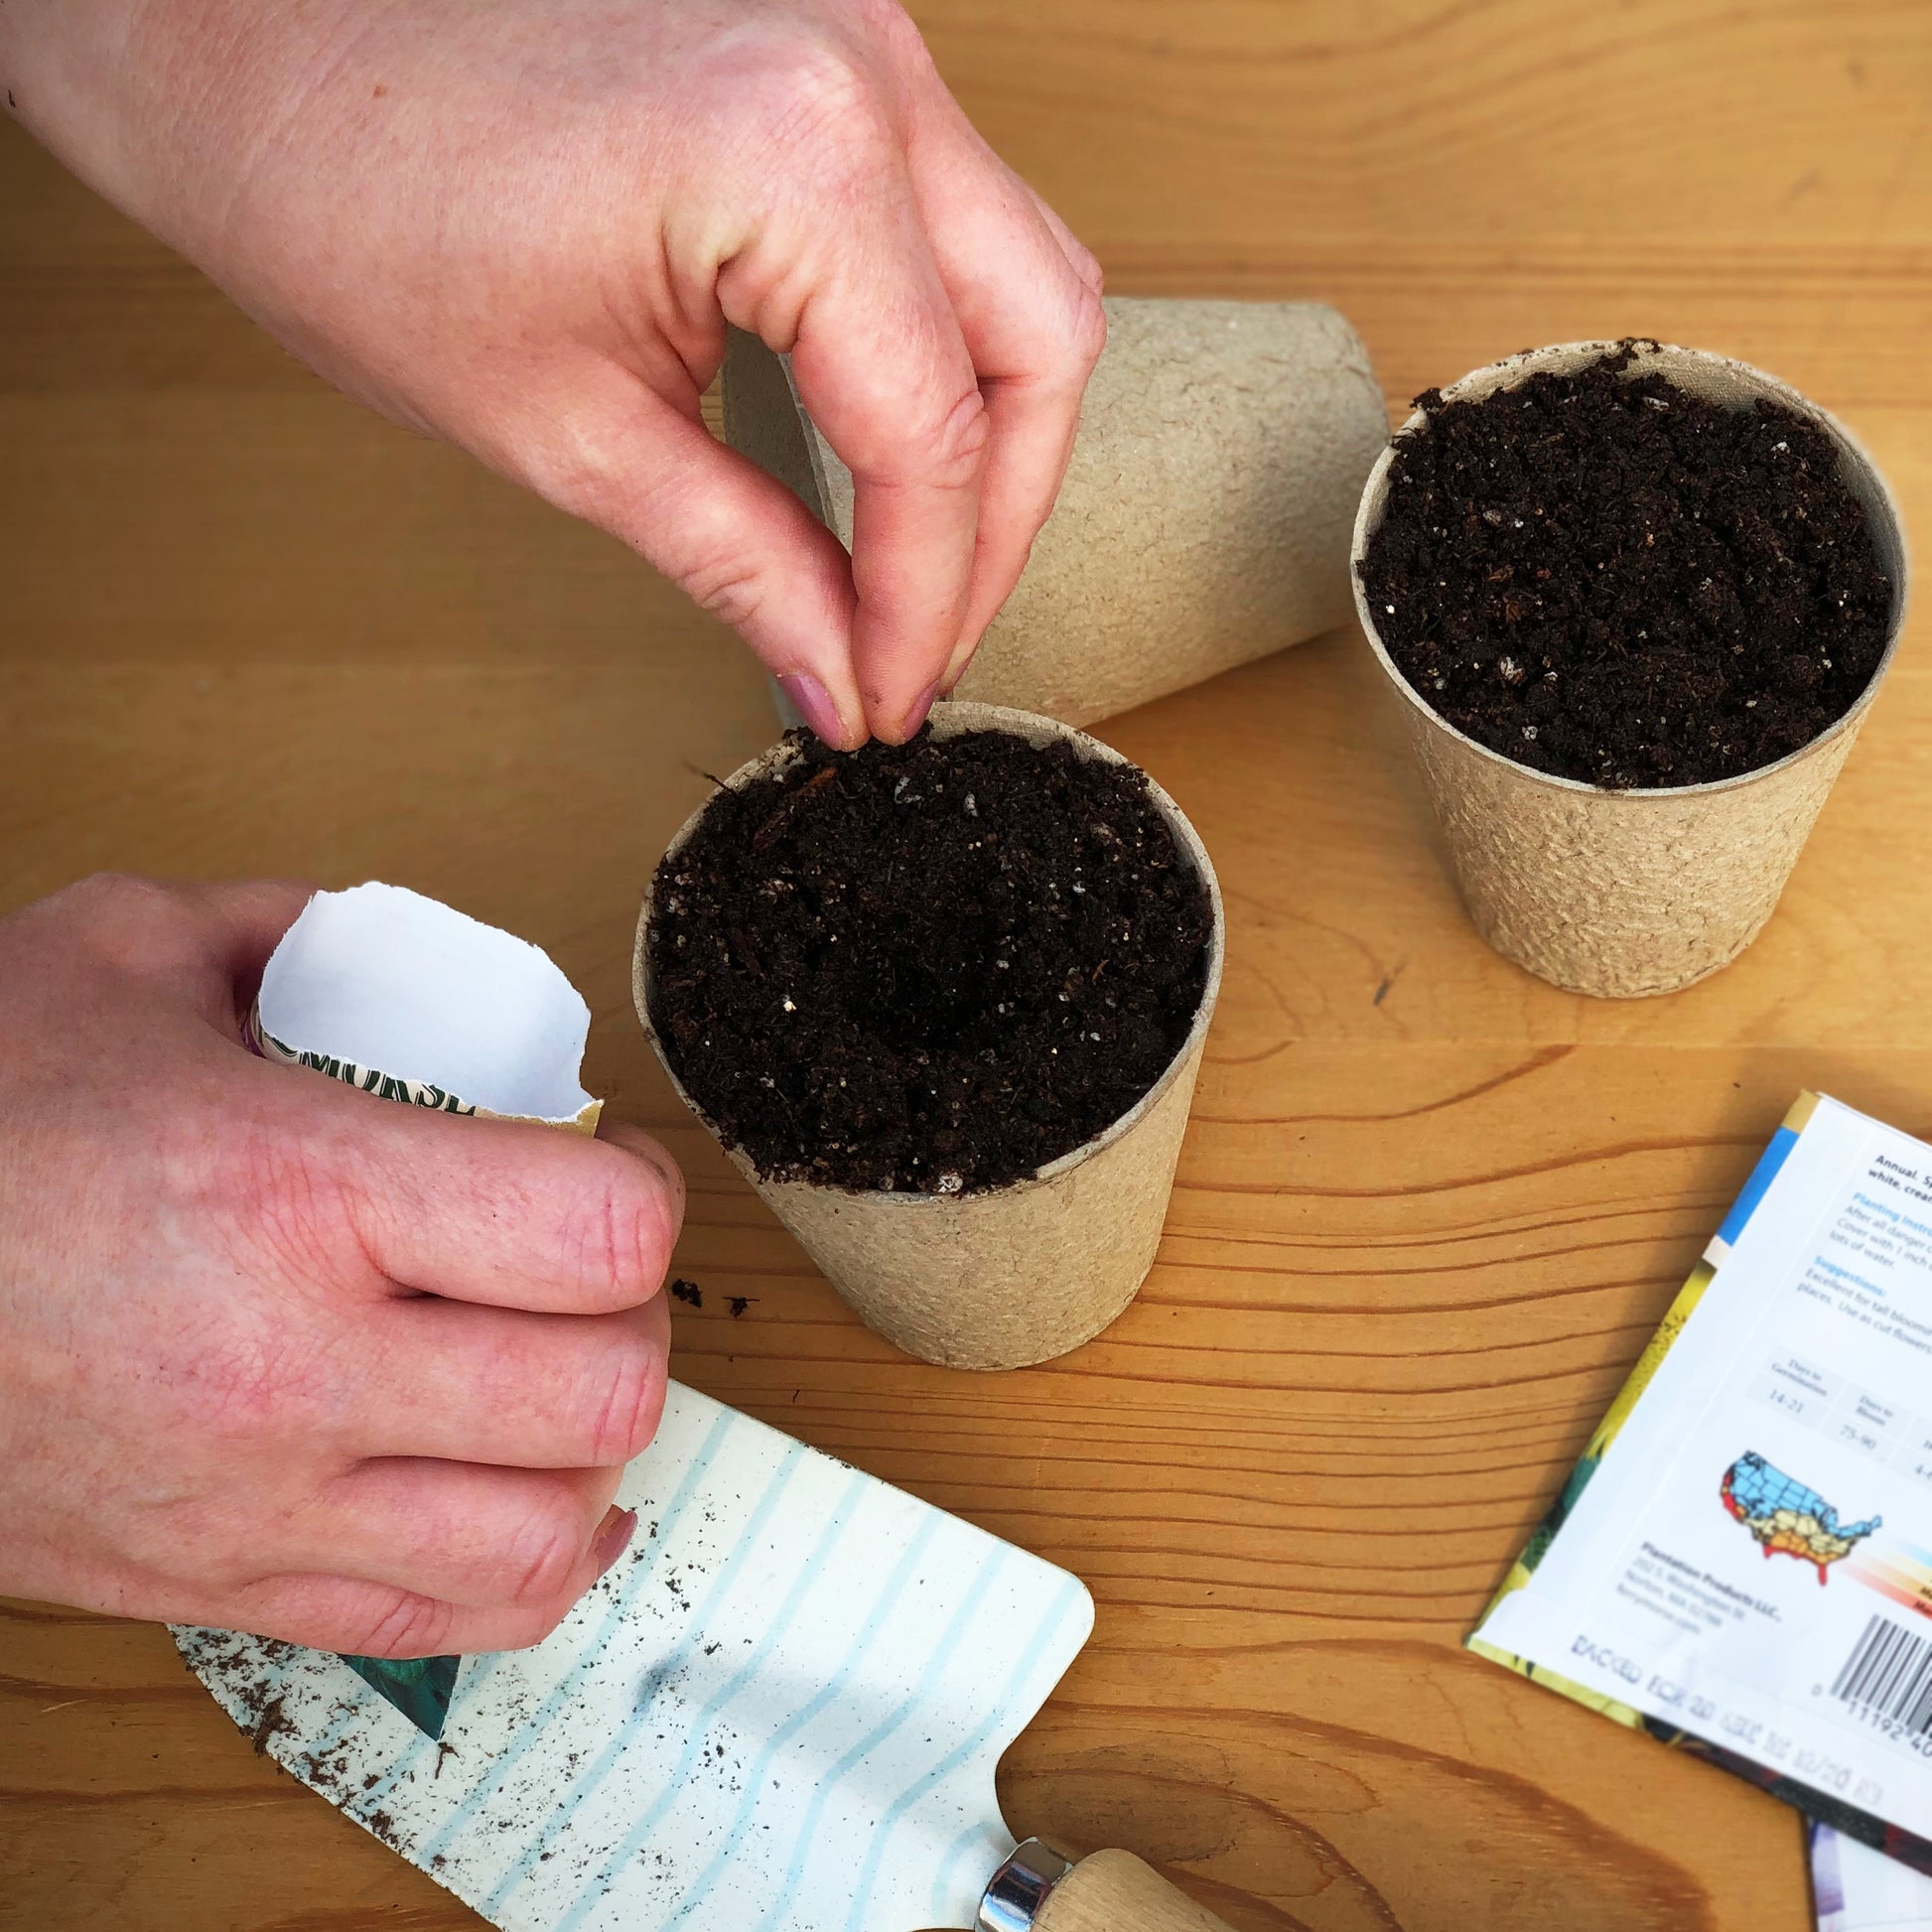 Start Black Krim Heirloom Tomatoes seeds in biodegradable peat pots or paper pots filled with sowing mix for easy transplanting.